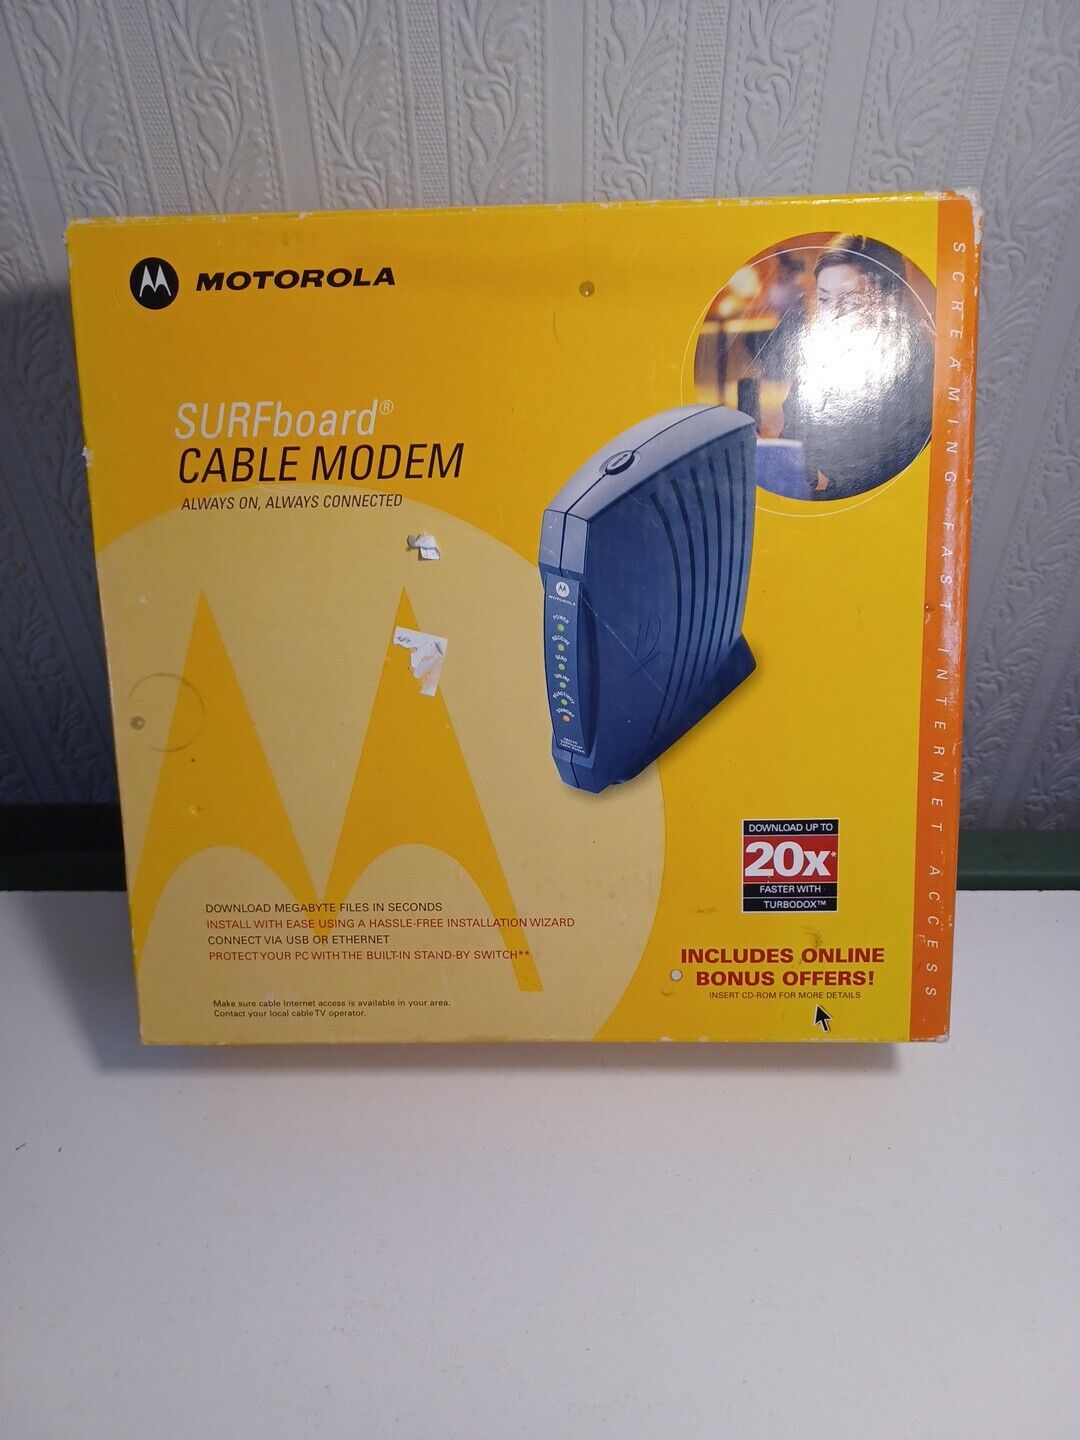 Motorola Arris SURFboard MODEM Model SB5120 with power supply no other materials